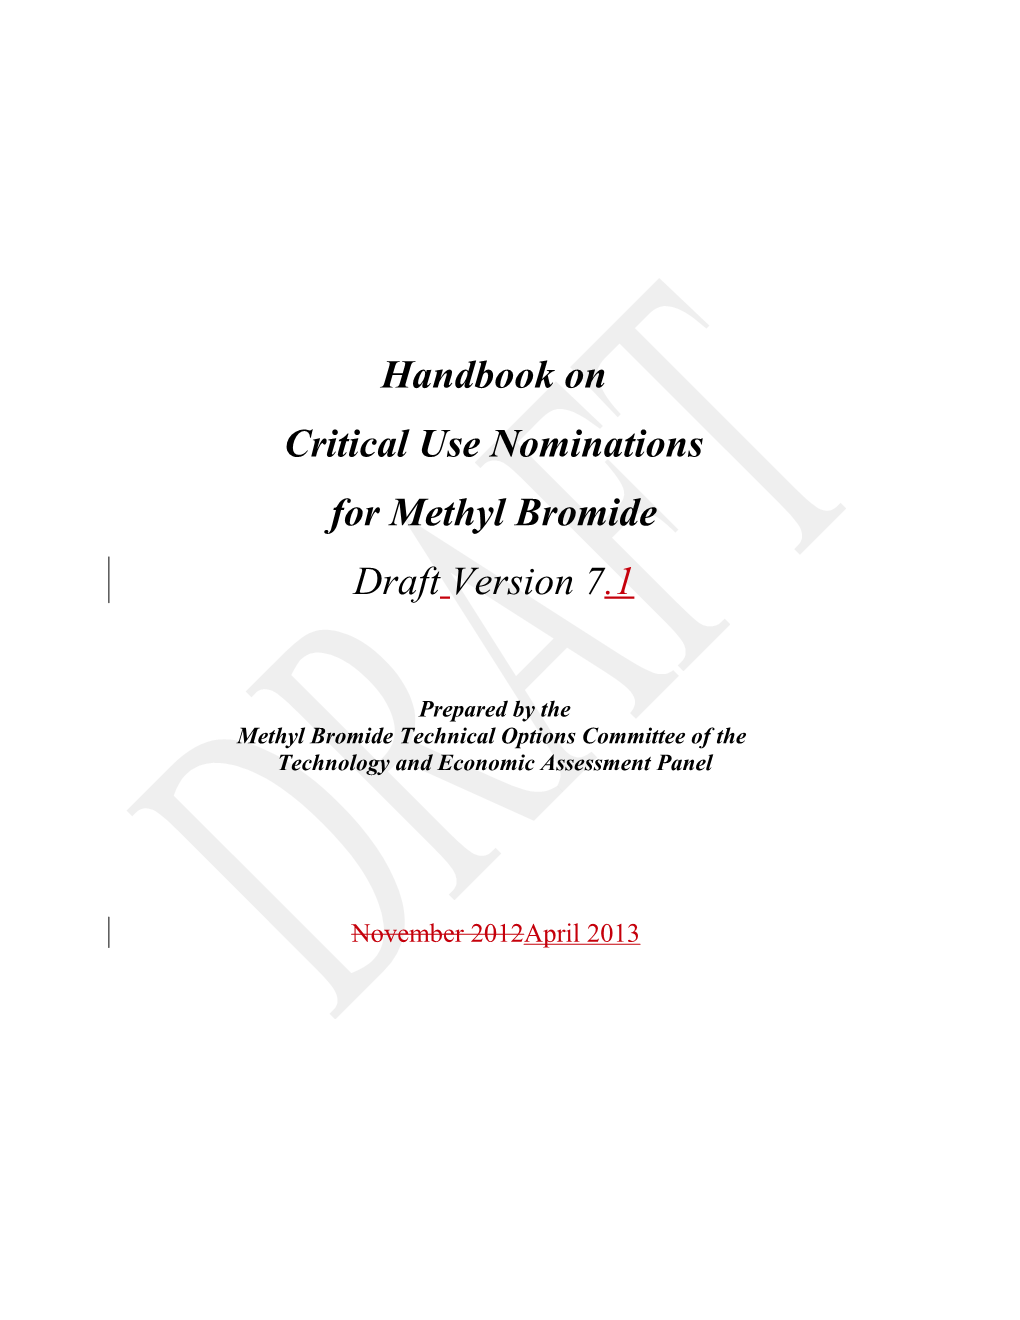 Handbook on Critical Use Nominations for Methyl Bromide - Draft Version 7.1 - Posted On